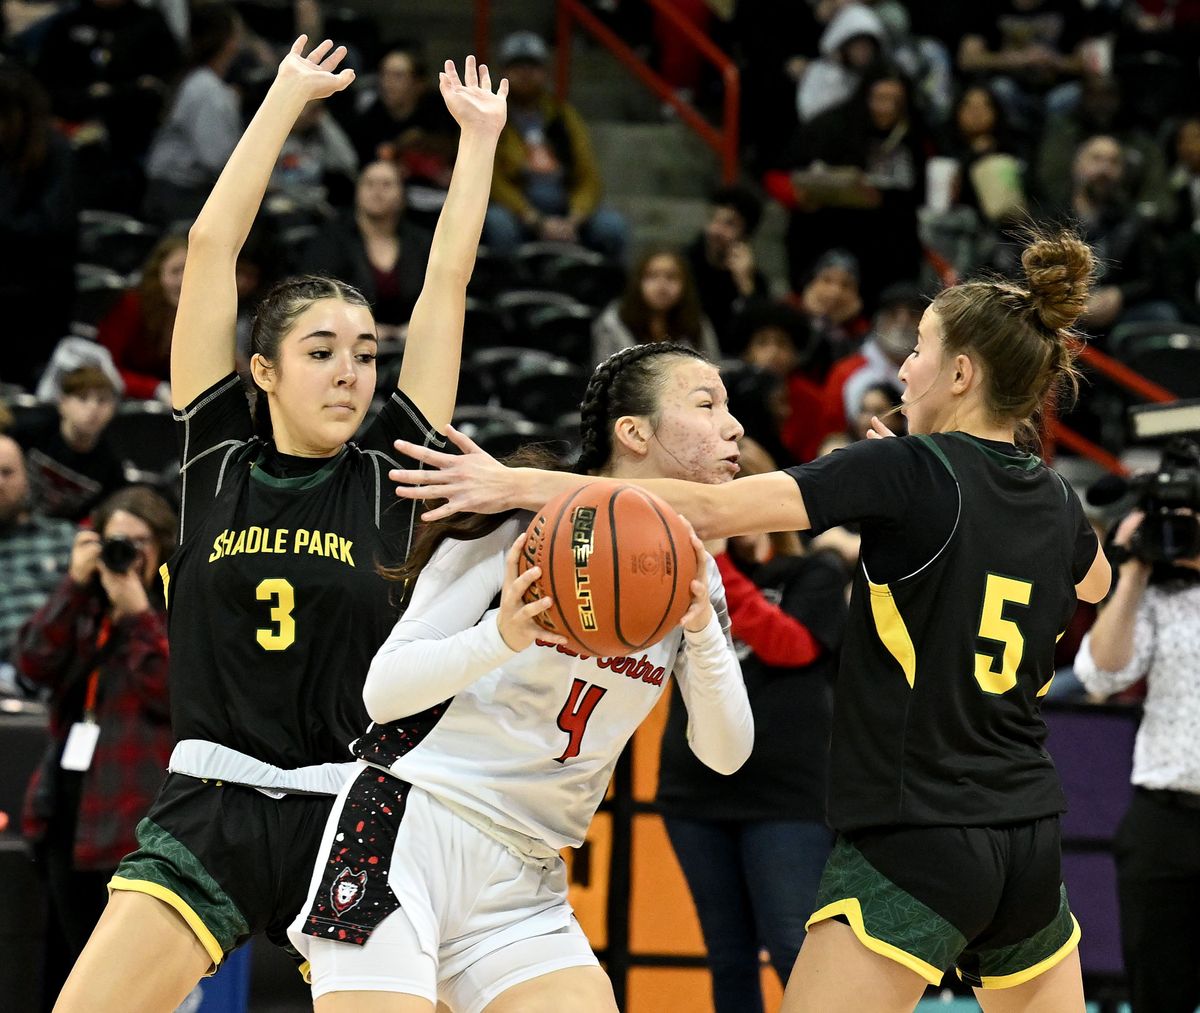 North Central’s Feather Auld heads to the basket as Shadle Park’s Julia Licea, left, and Addison Jahn defend during the second half of Tuesday’s Groovy Shoes spirit game at the Arena.  (Colin Mulvany/The Spokesman-Revi)